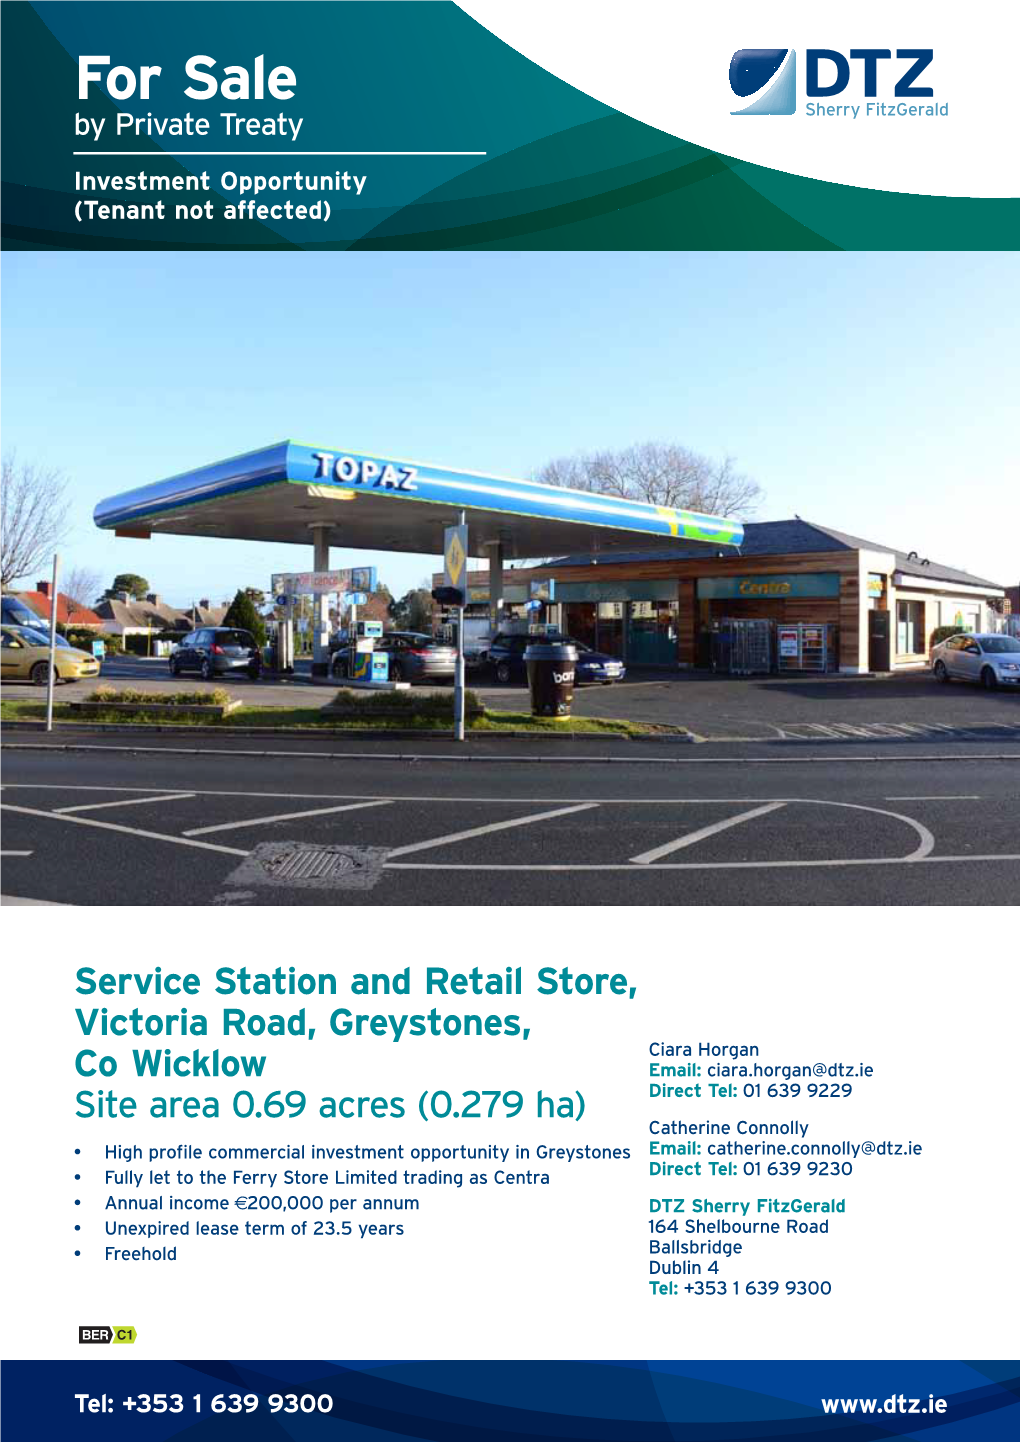 Service Station and Retail Store, Victoria Road, Greystones, Co Wicklow Site Area 0.69 Acres (0.279 Ha)